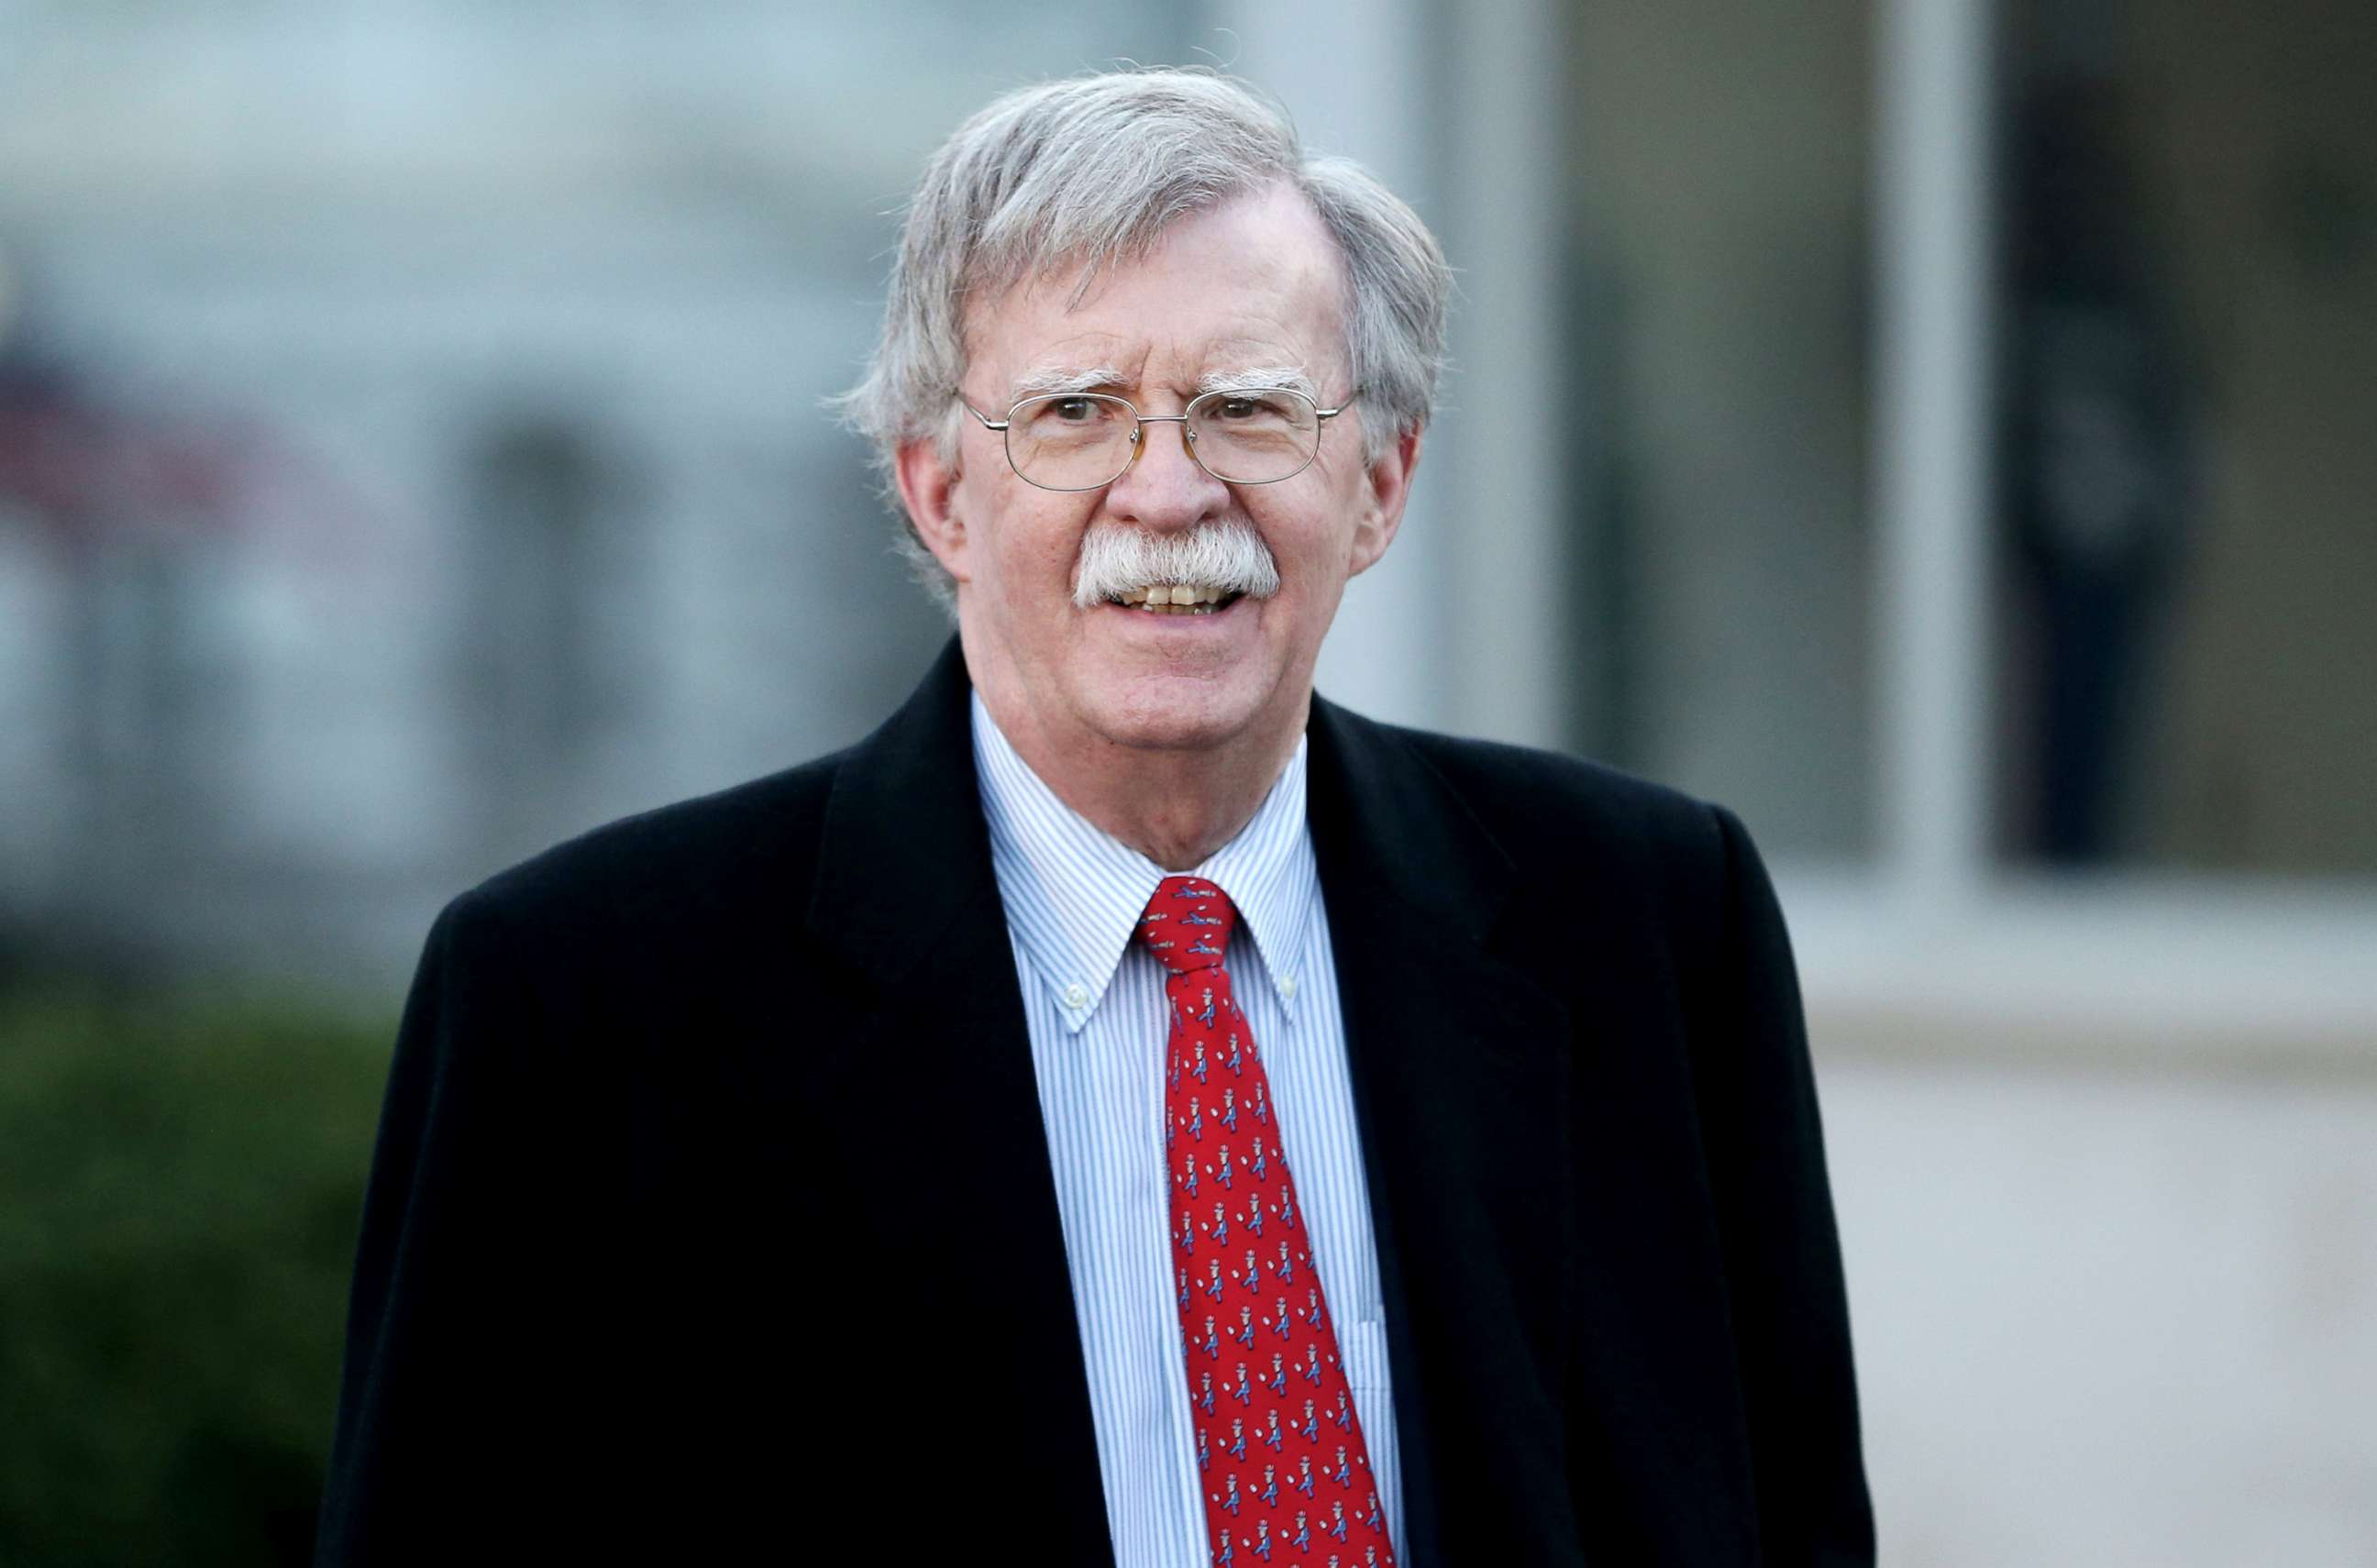 PHOTO: U.S. National Security Adviser John Bolton walks to an interview outside the White House in Washington, March 5, 2019.